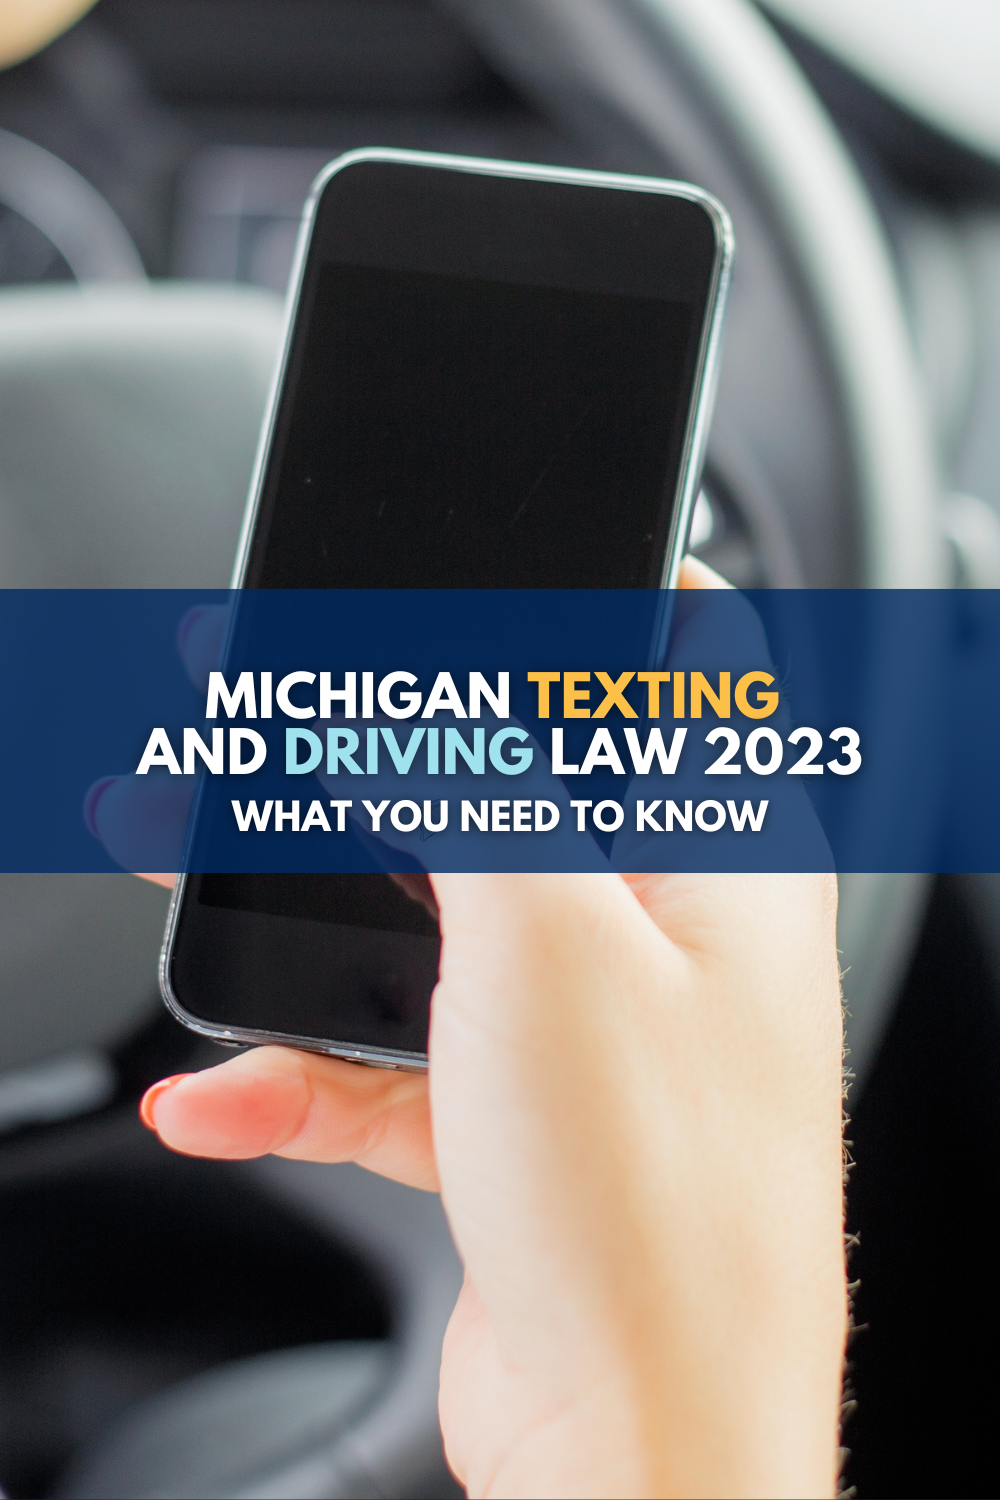 Michigan Texting and Driving Law 2023: What You Need To Know